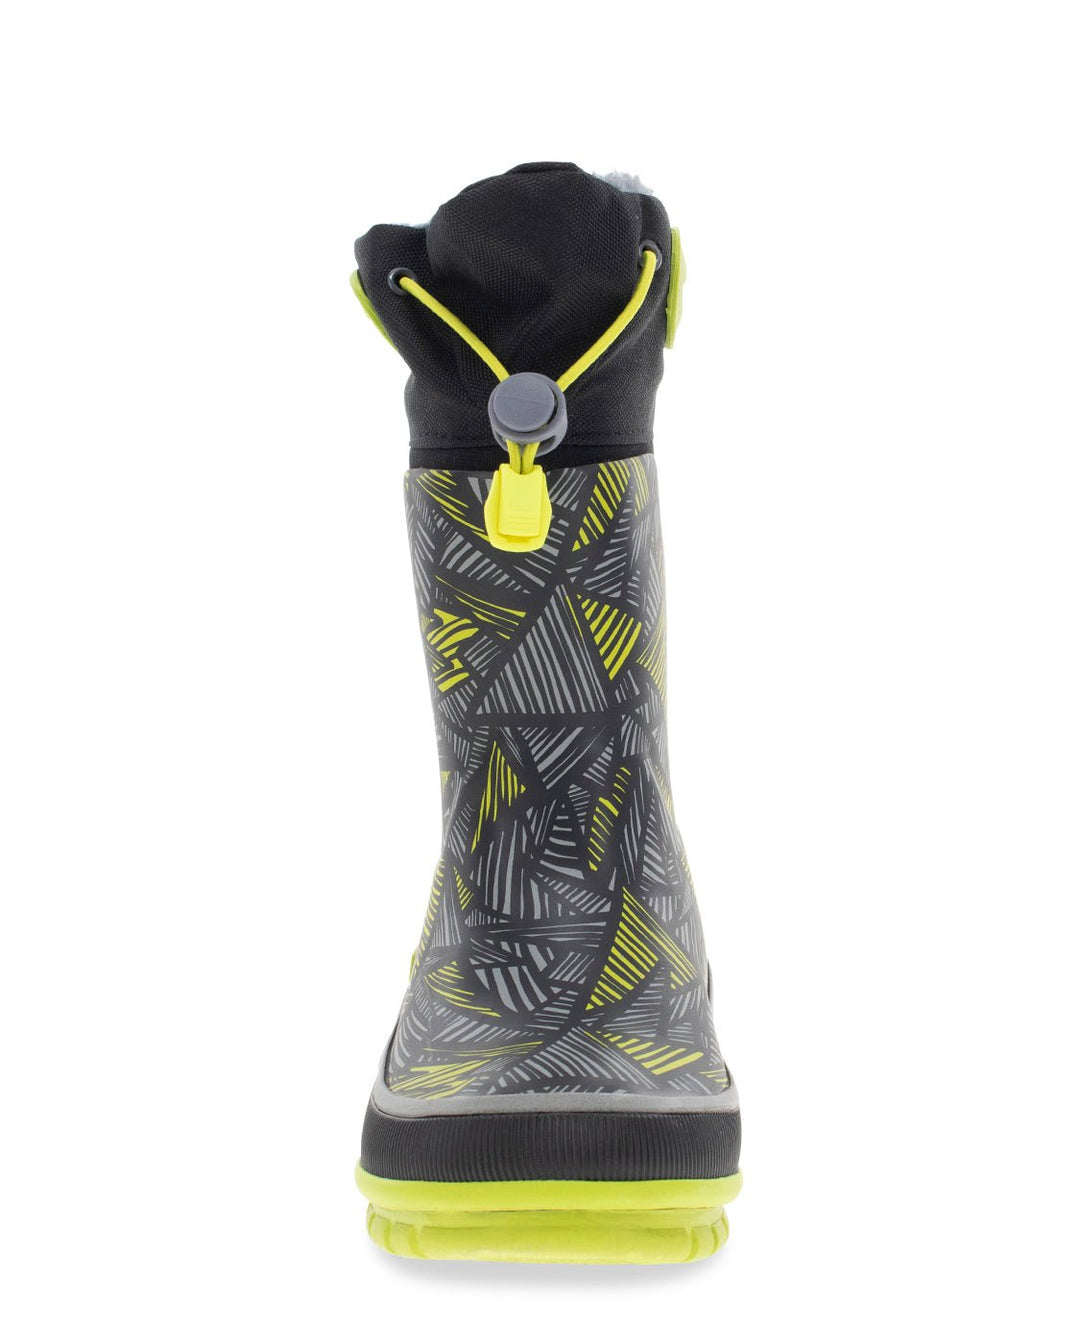 Kids Mega Neoprene Cold Weather Boot - Charcoal - Western Chief